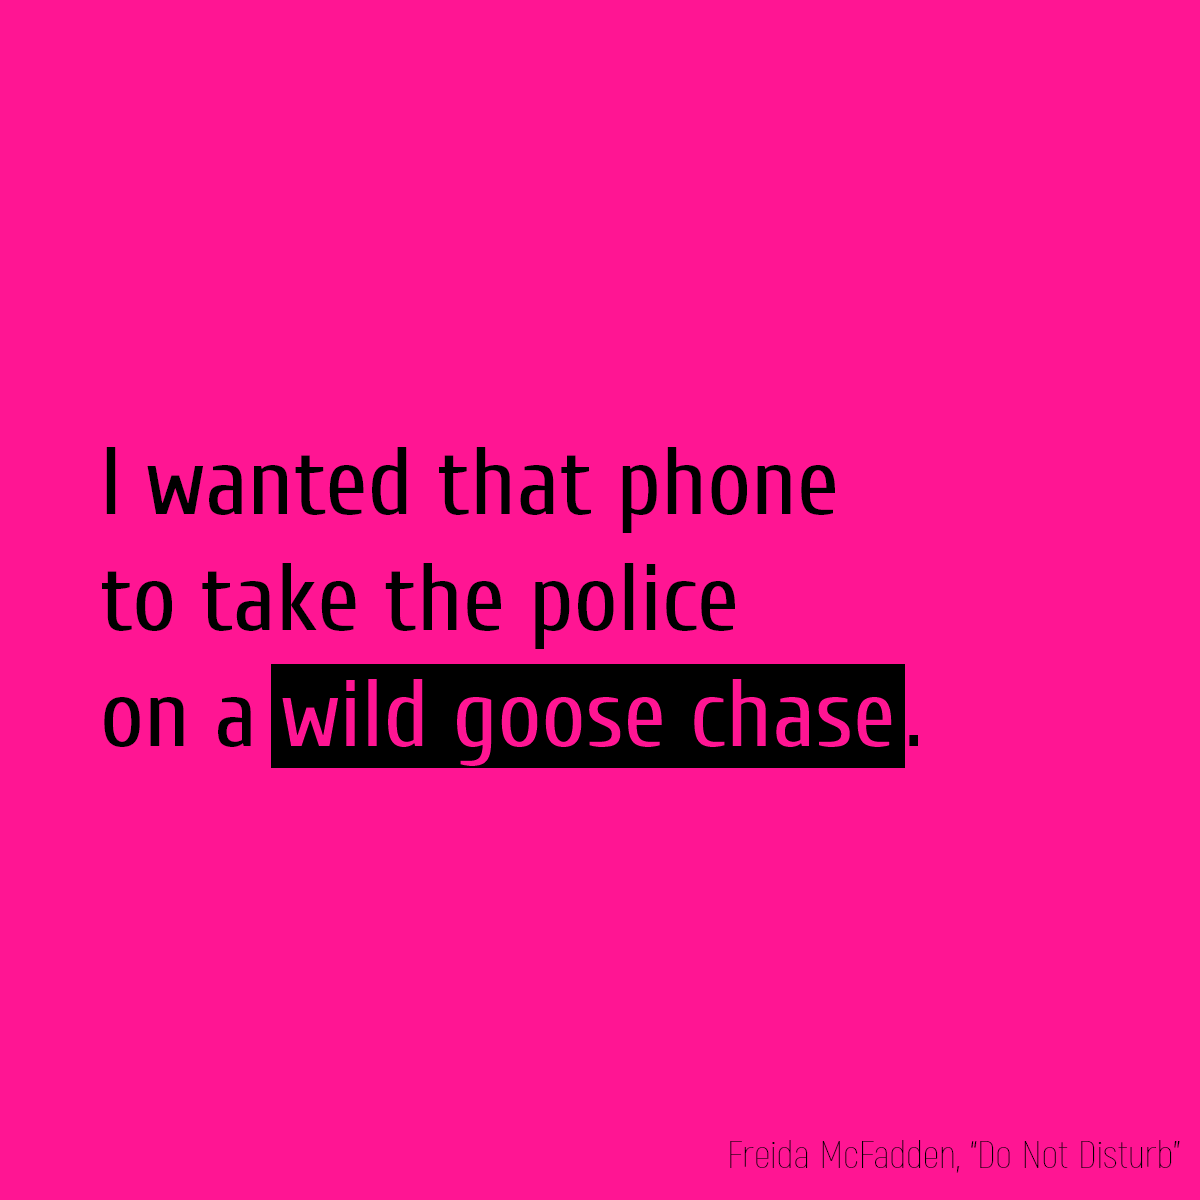 I wanted that phone to take the police on a **wild goose chase**.